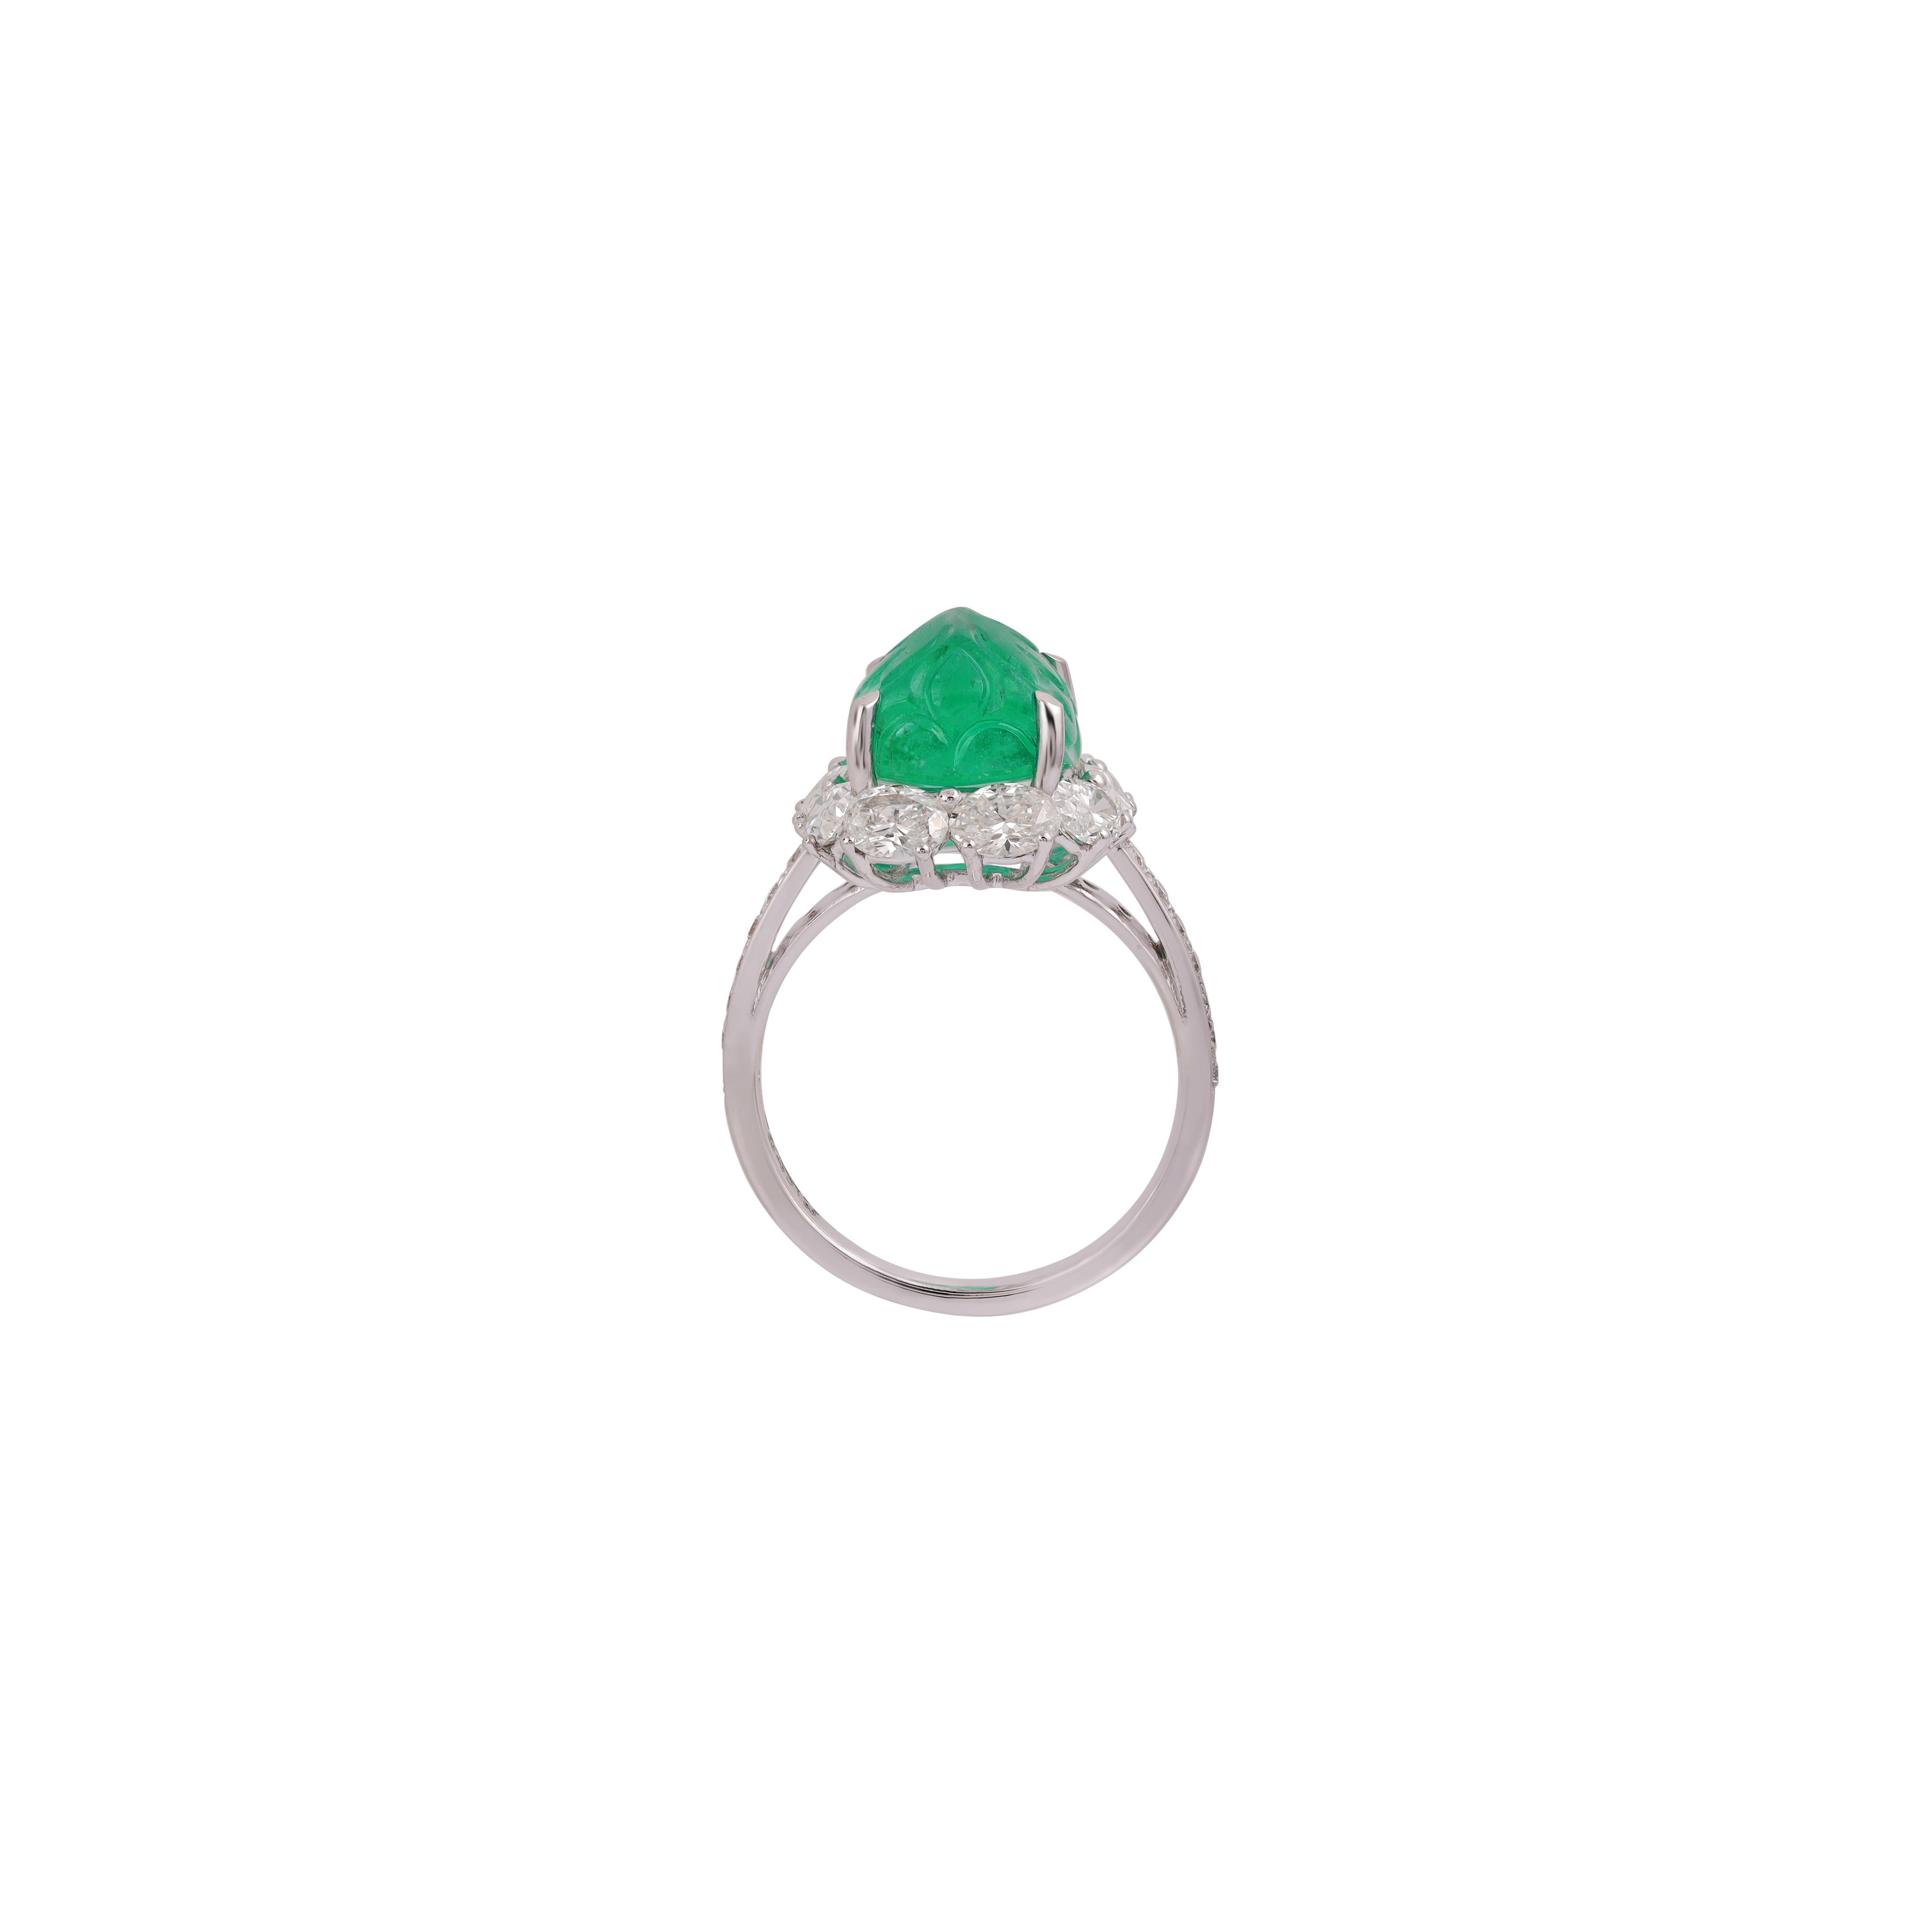 Contemporary 6.46 Carat Carved Zambian Emerald & Cluster Diamond Ring in 18k White Gold For Sale